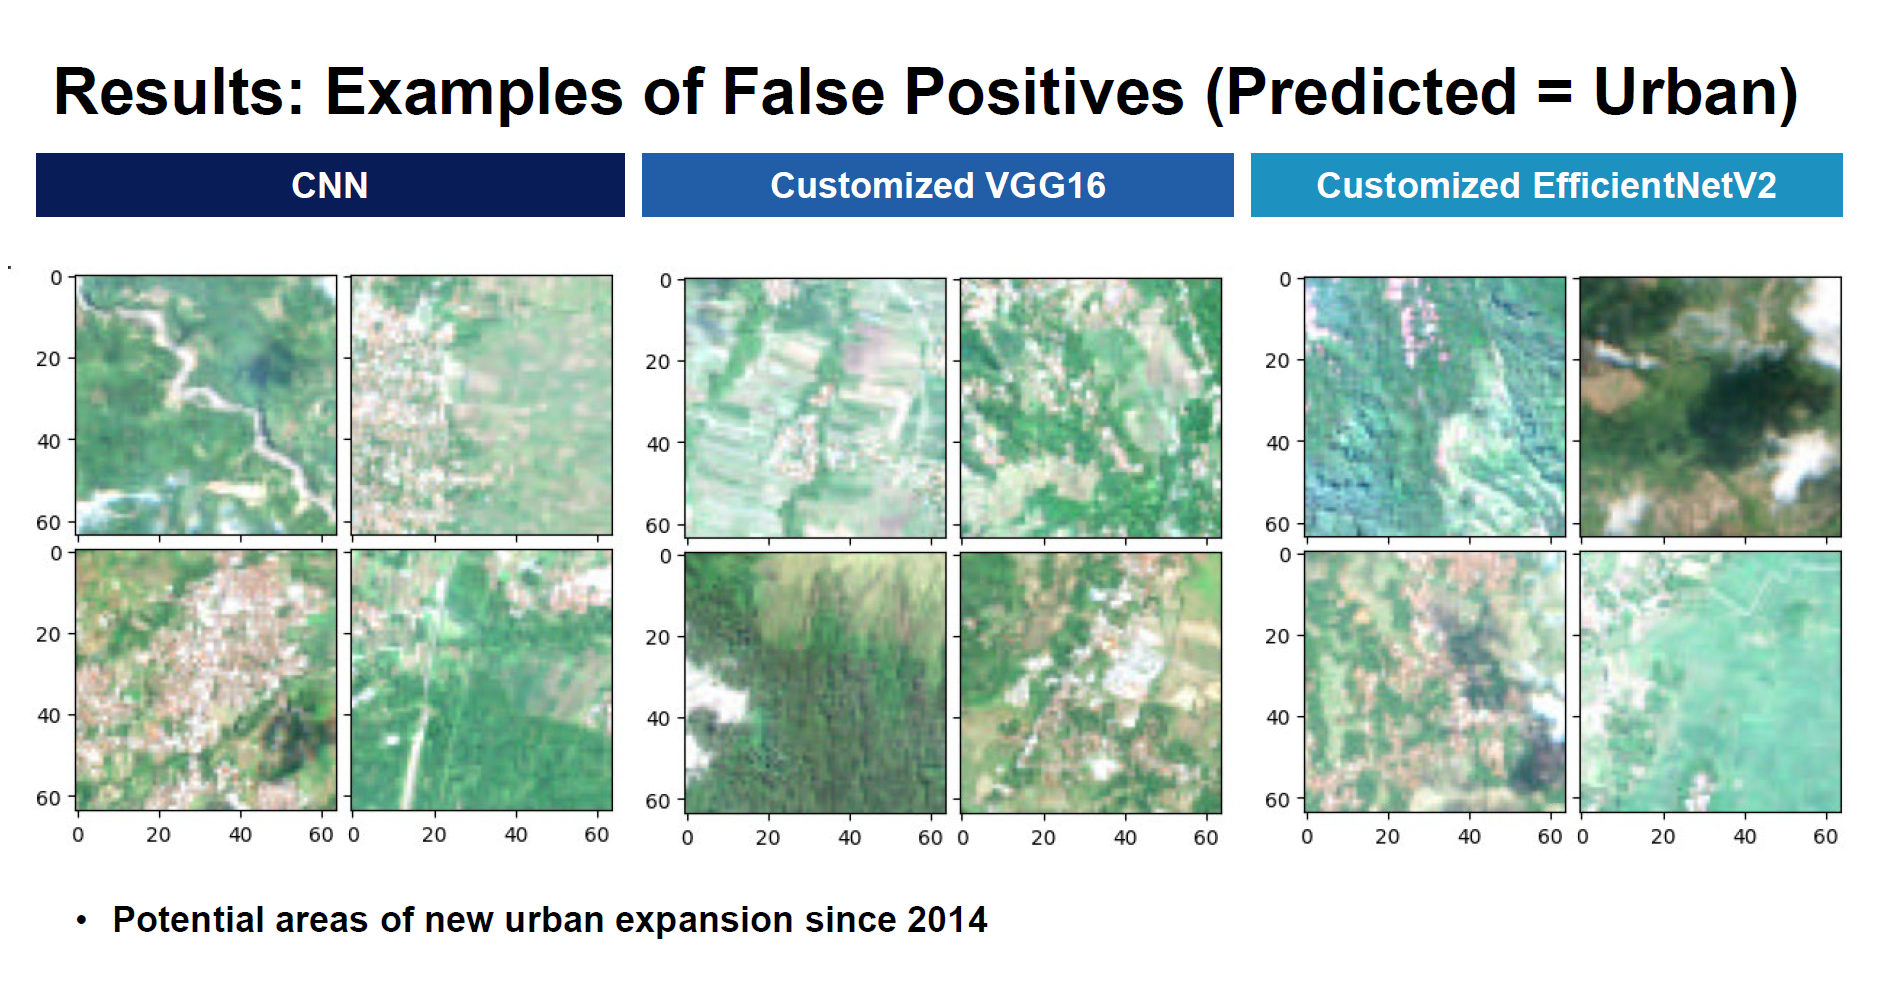 Presentation slide of examples of false positives: images predicted as urban but labelled as non-urban. Some examples show areas that appear to be urbanized.